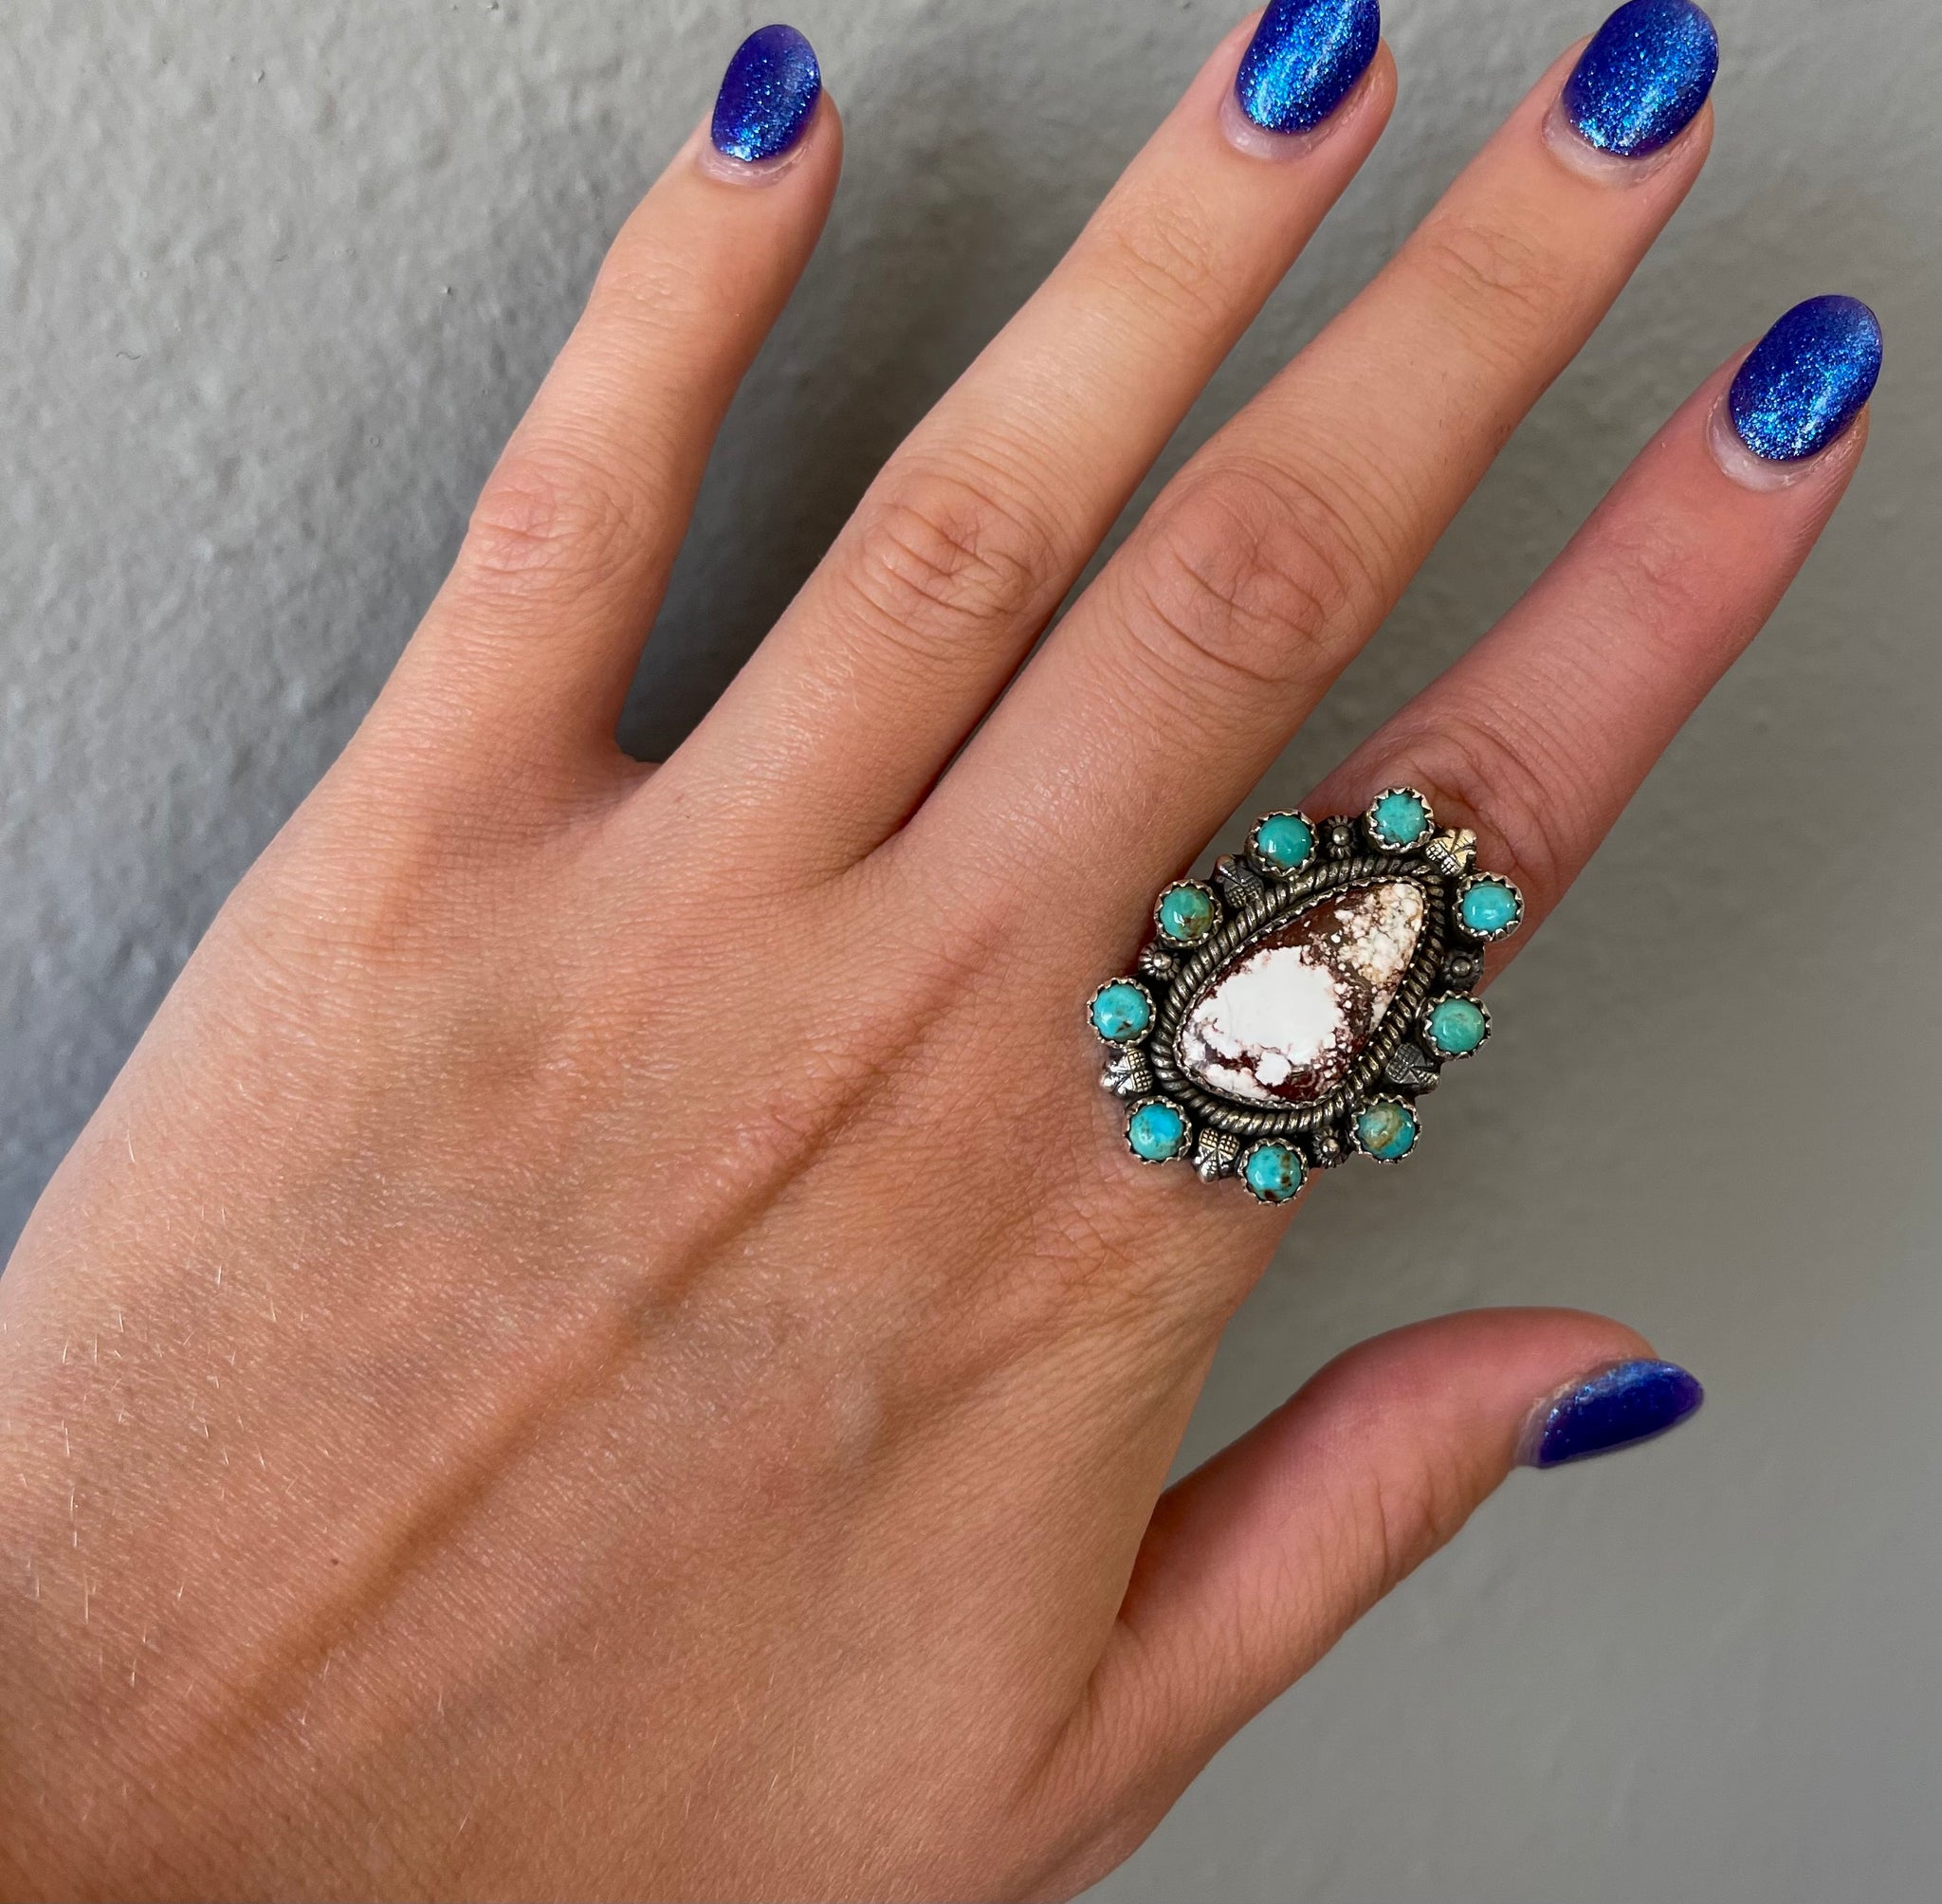 Turquoise & Wild Horse Sterling Silver Adjustable Ring